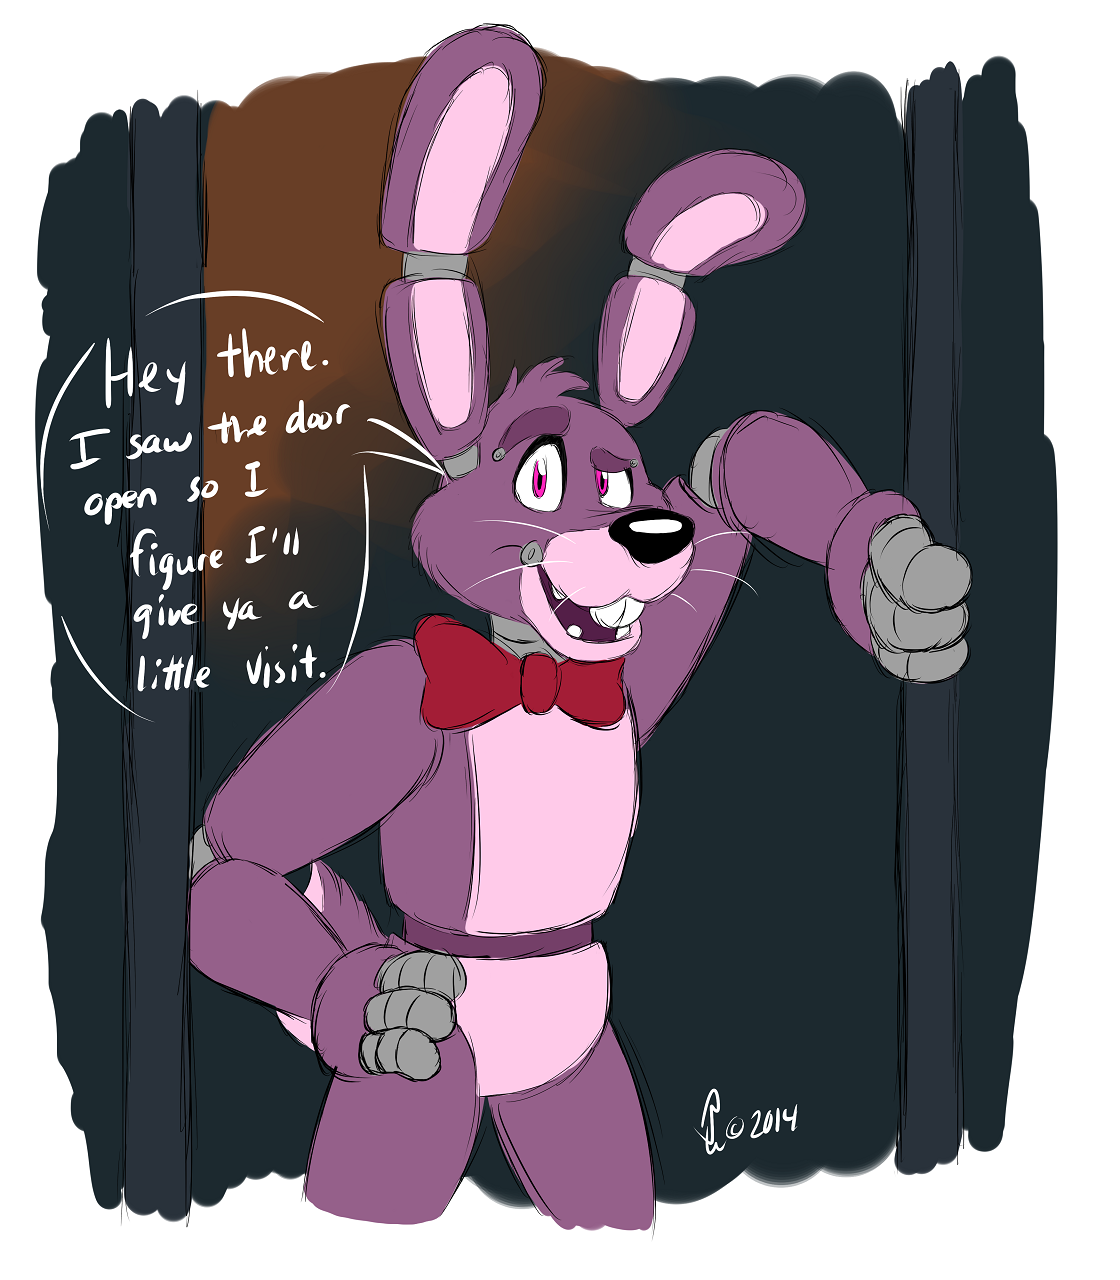 FNaF characters Ds by AzulTheBunny (me) AzulTheBunny - Illustrations ART  street